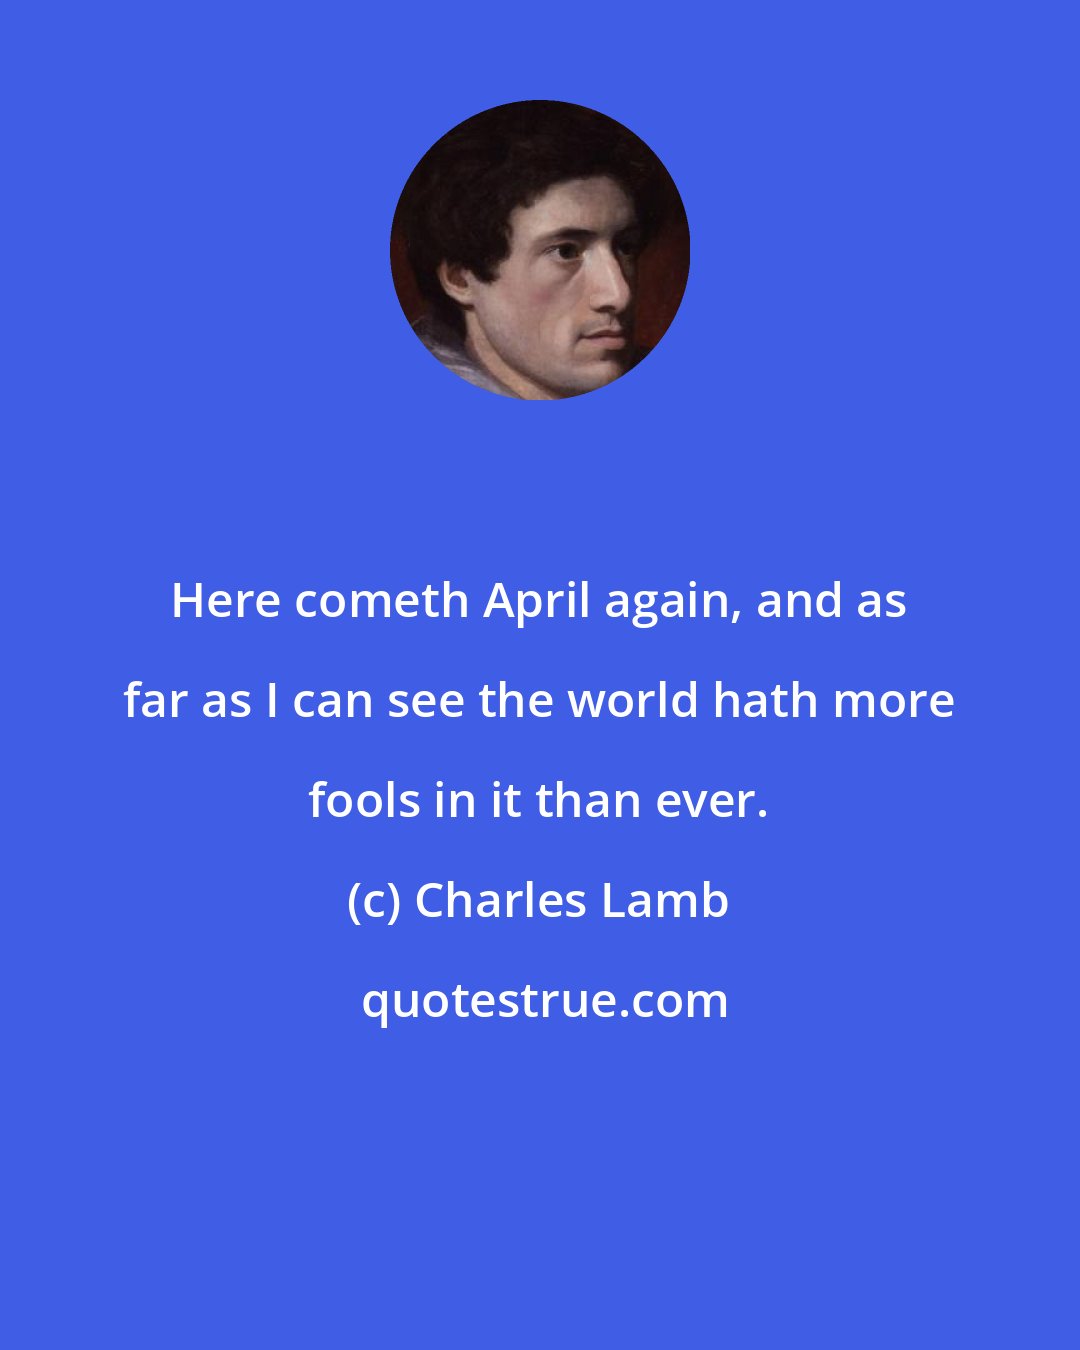 Charles Lamb: Here cometh April again, and as far as I can see the world hath more fools in it than ever.